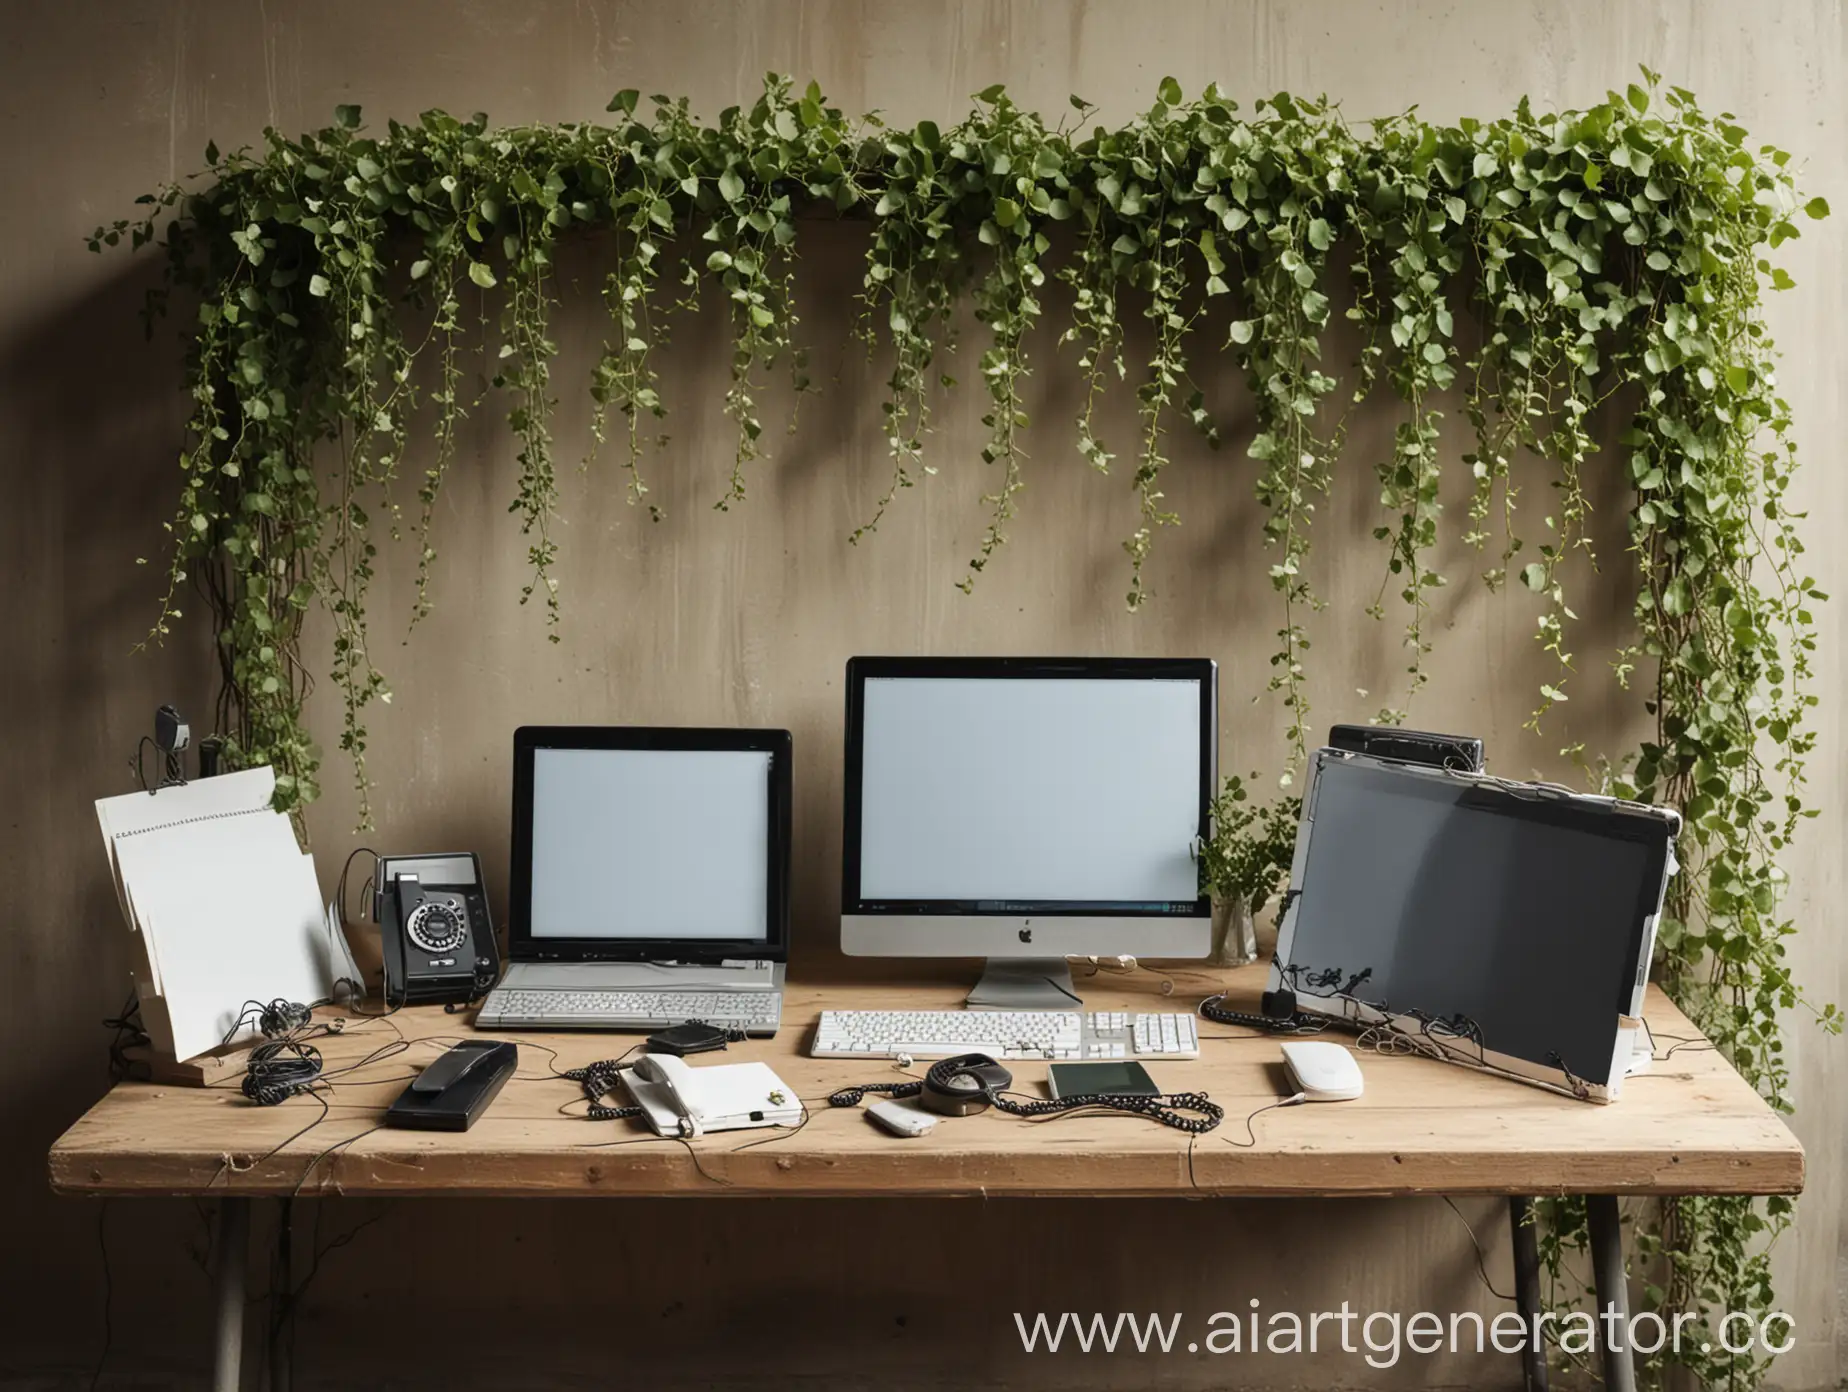 Modern-Workspace-Notebook-Computer-and-Telephone-on-Table-Against-Vine-Wall